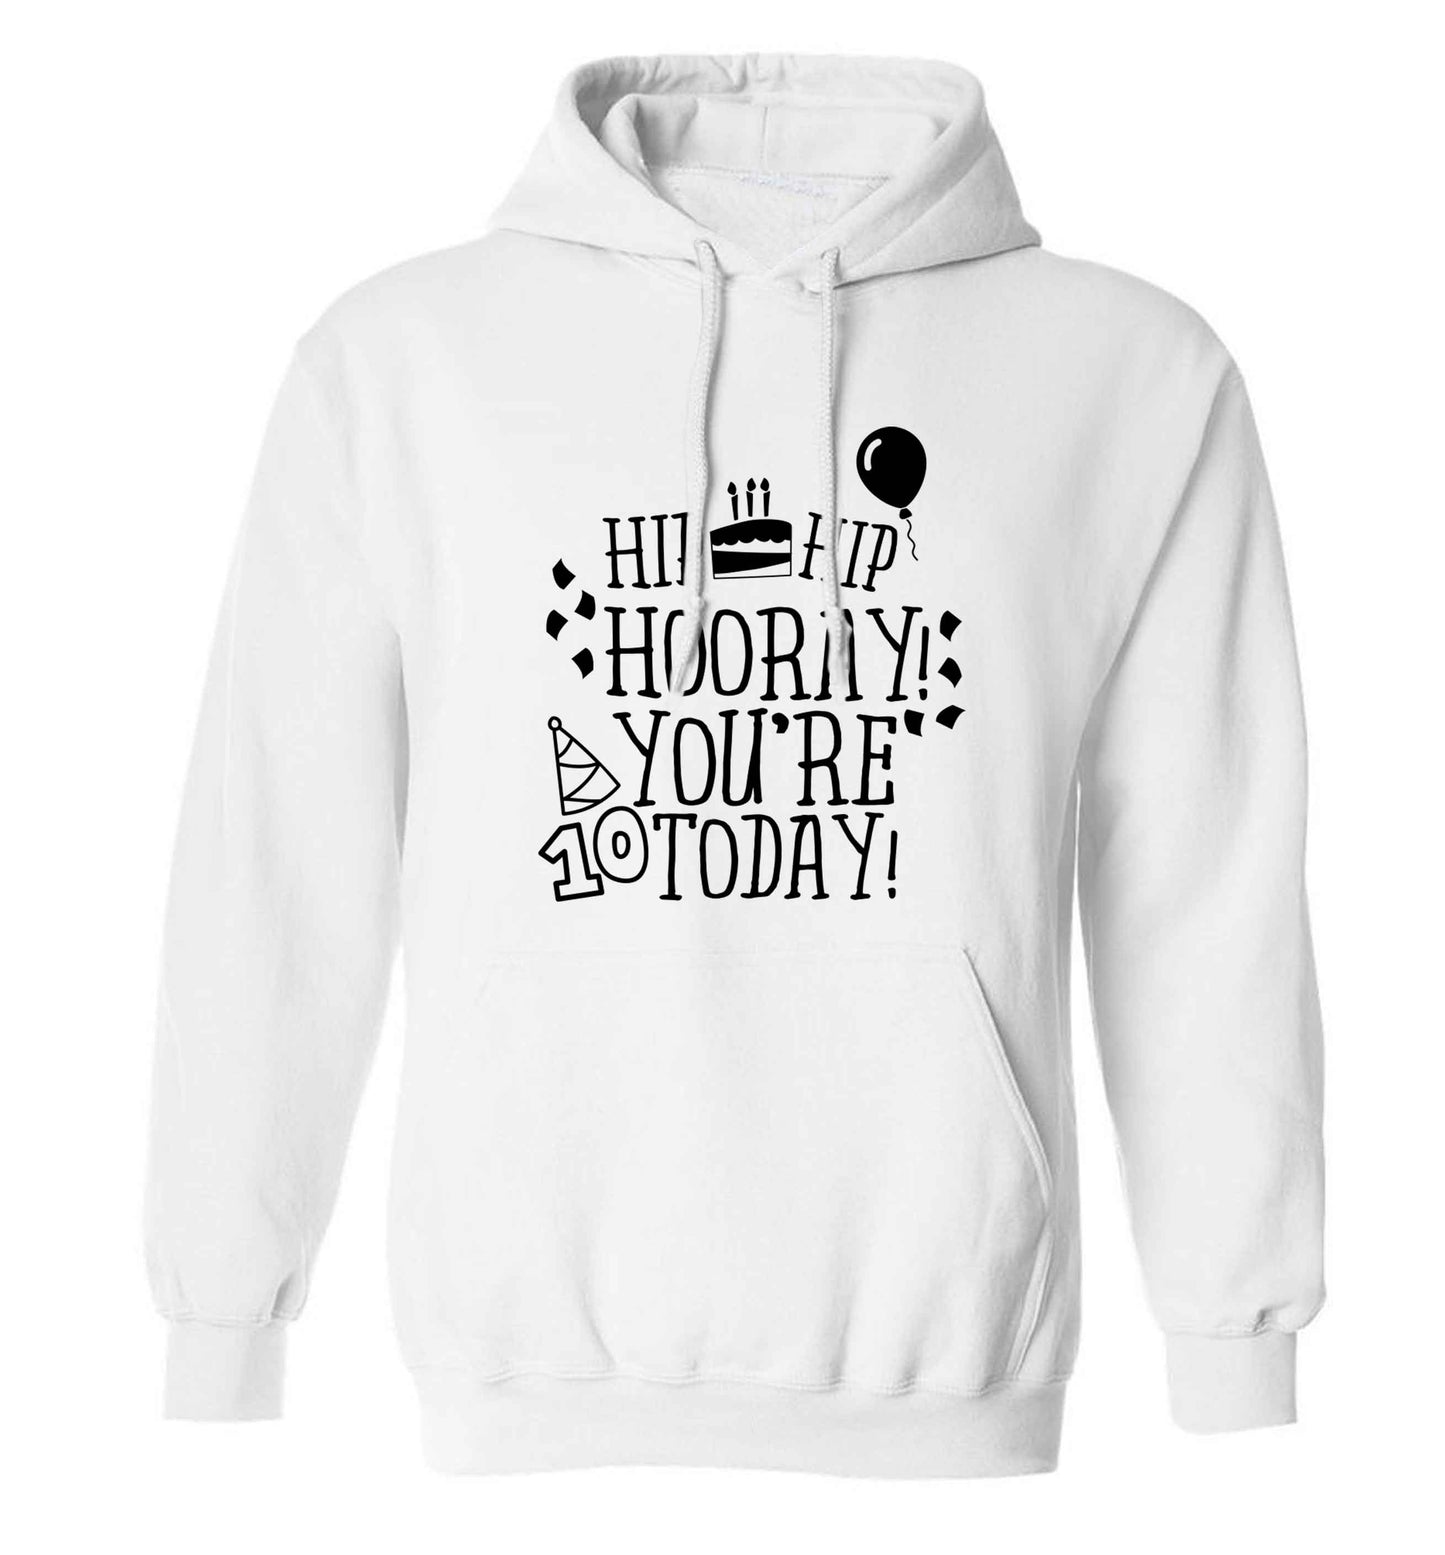 Hip hip hooray you're ten today! adults unisex white hoodie 2XL